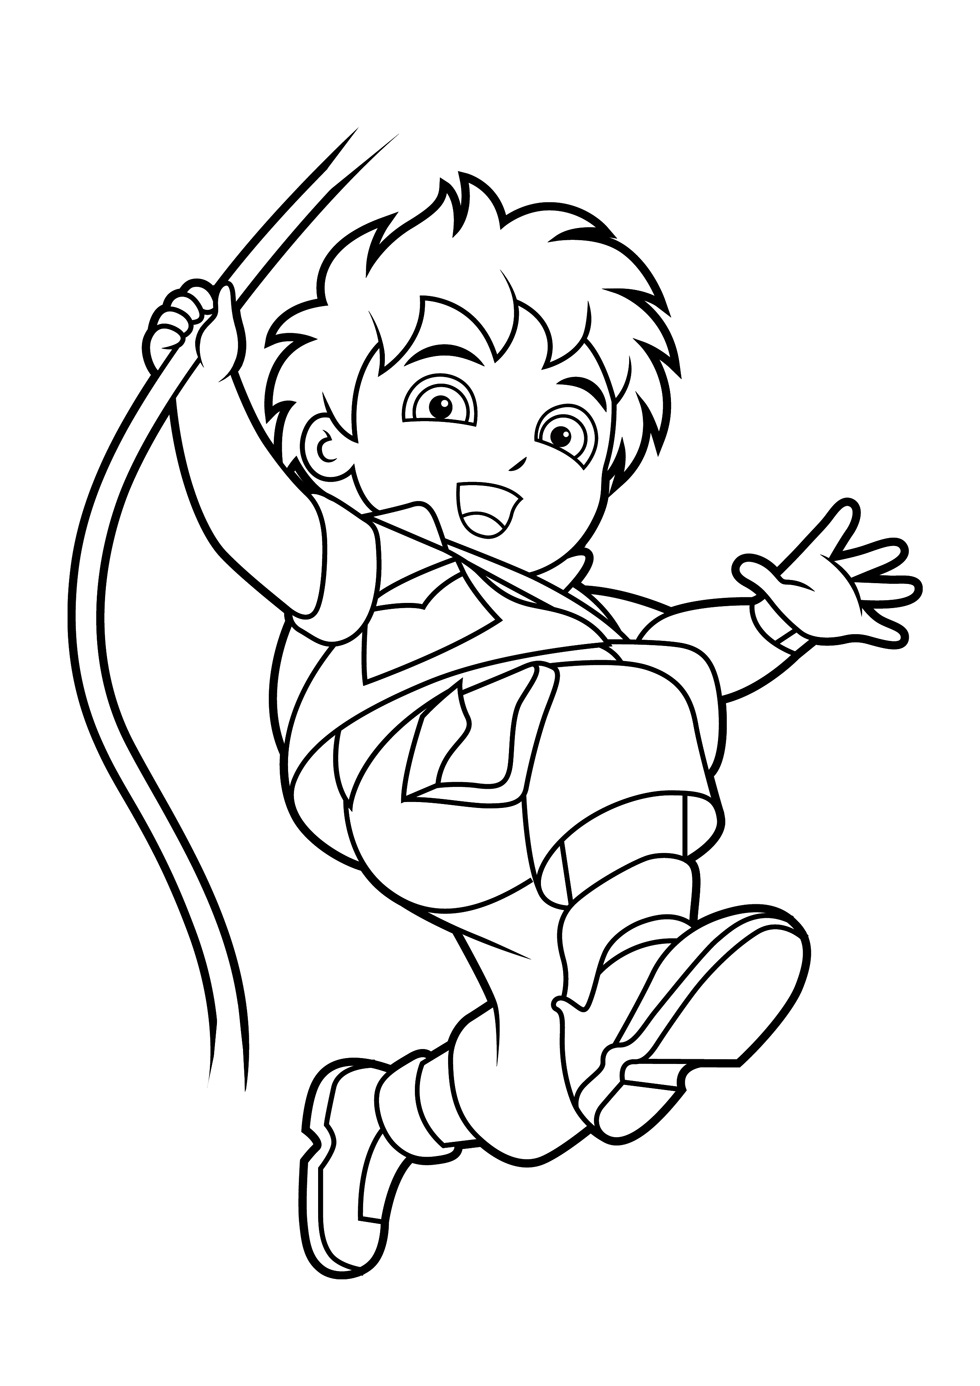 Download Cute Diego Coloring Page - Free Printable Coloring Pages for Kids